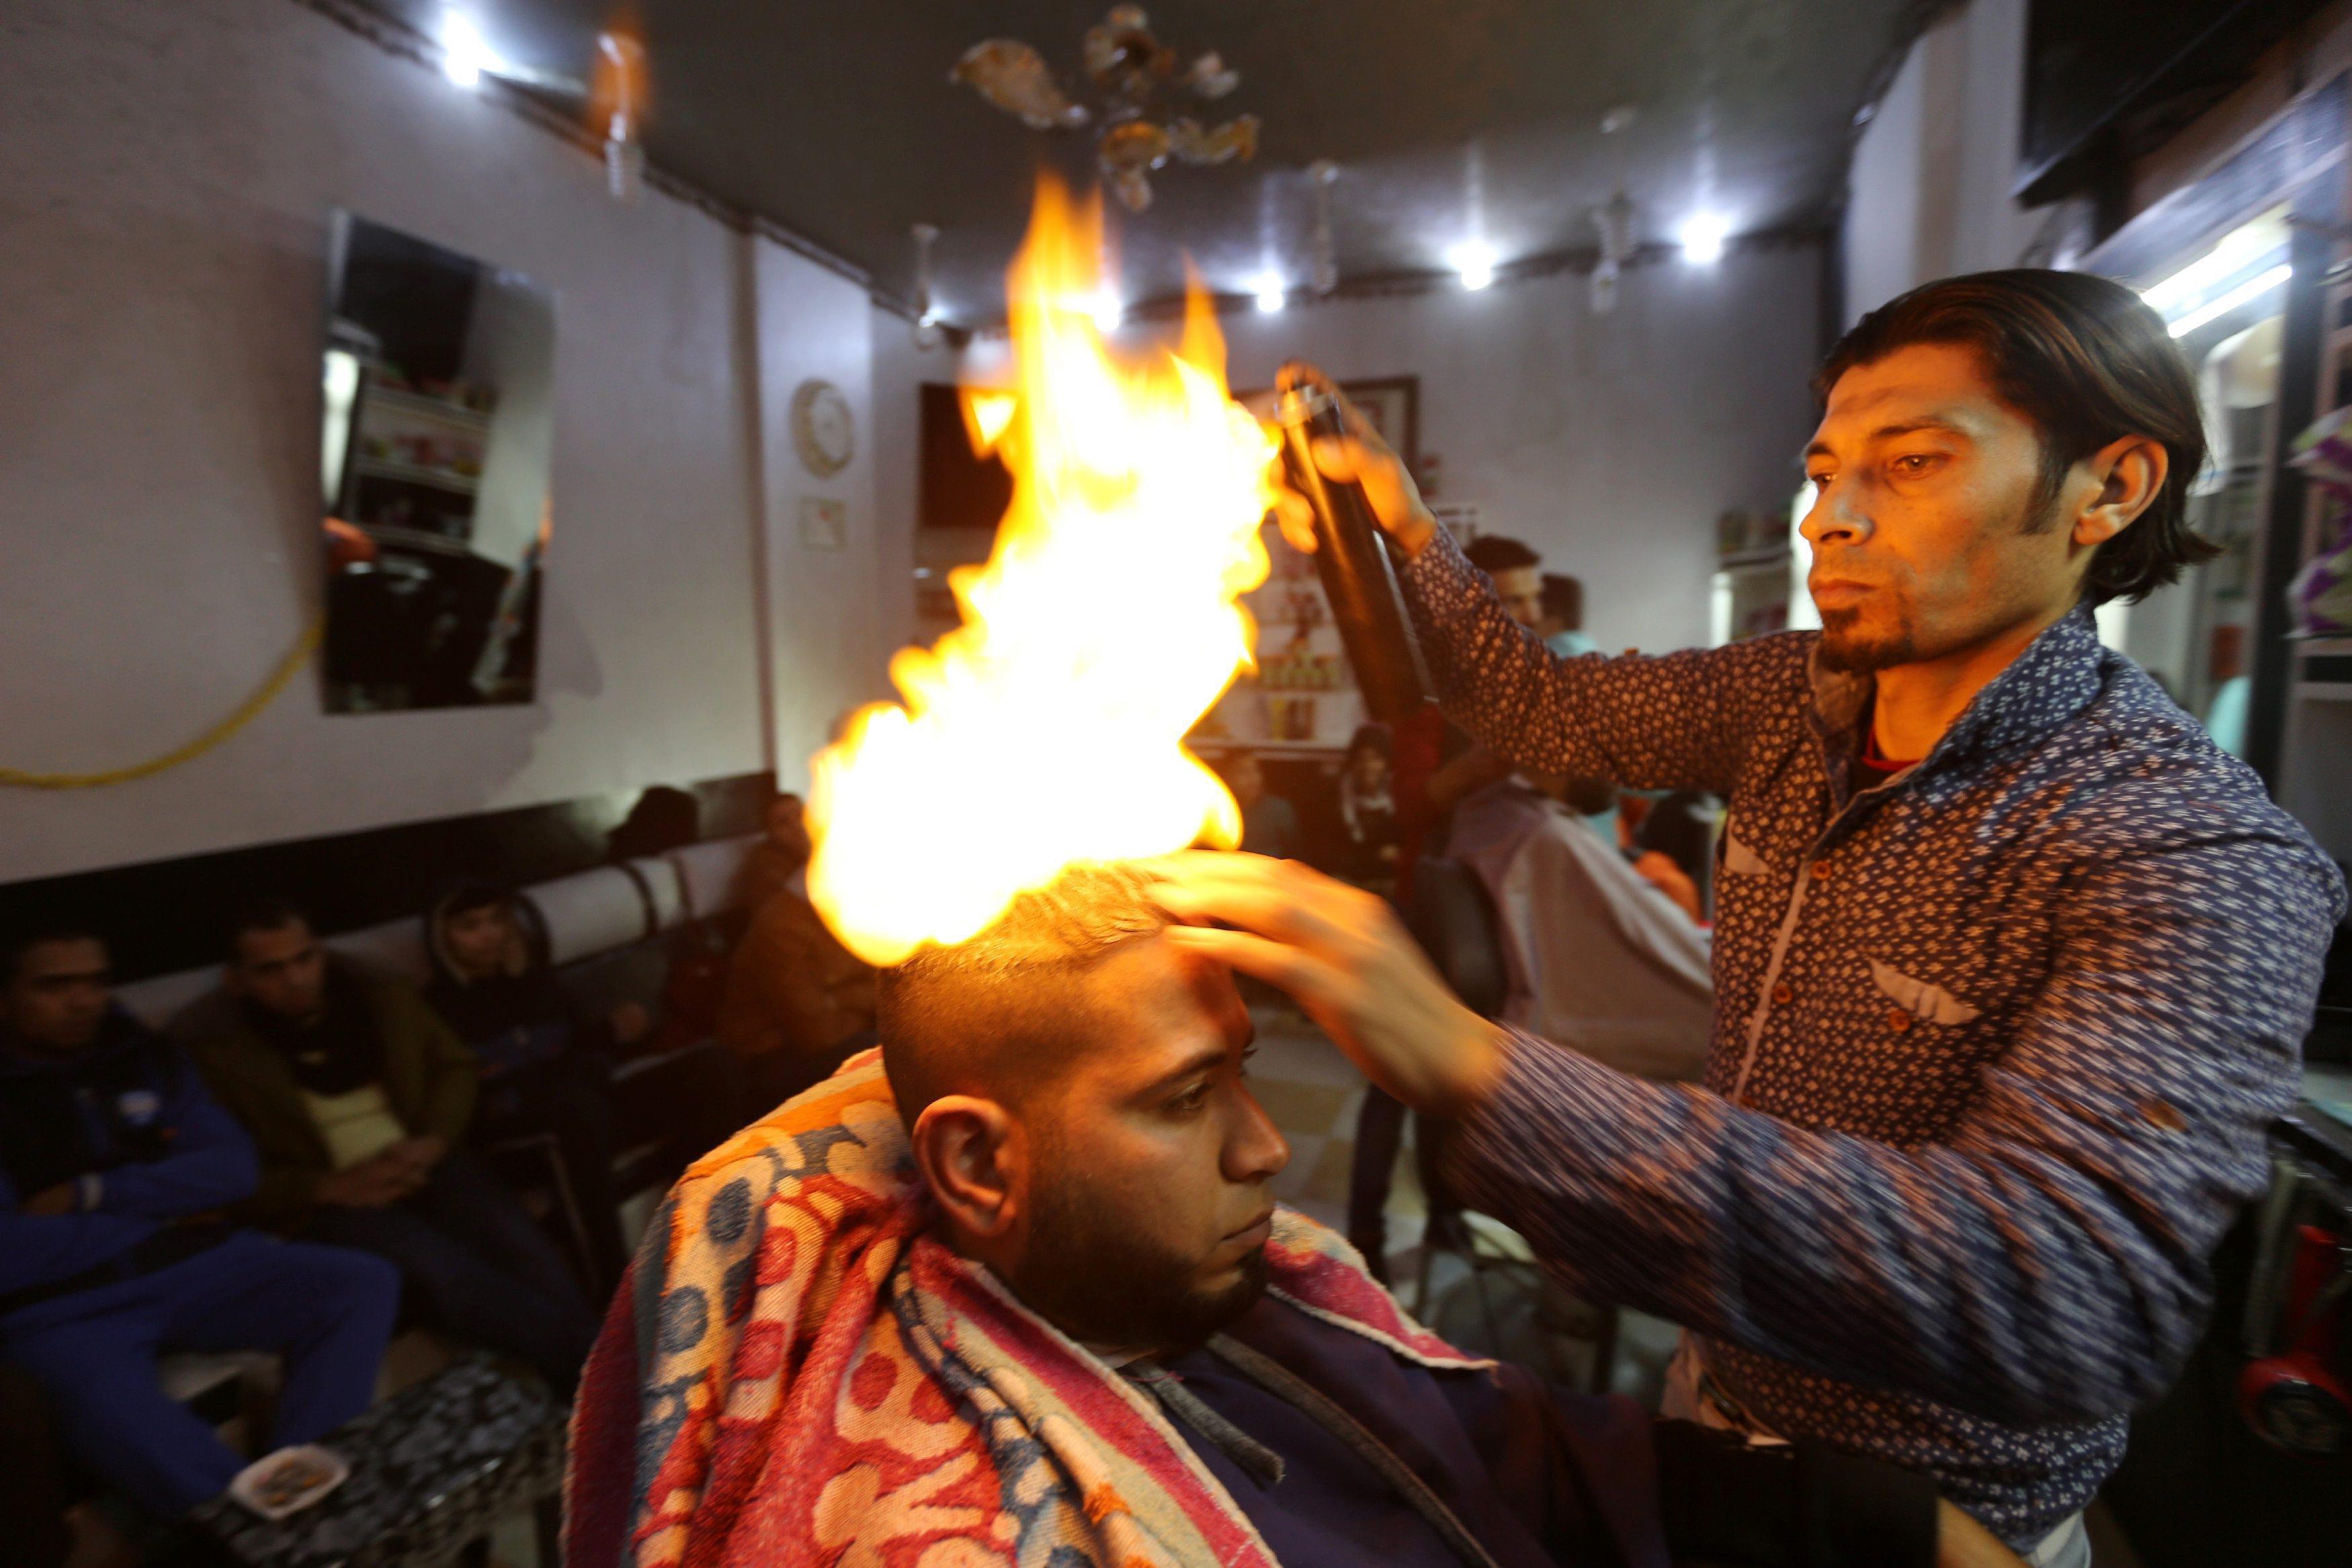 Palestinian barber Ramadan Odwan styles and straightens the hair of a customer with fire at his salo